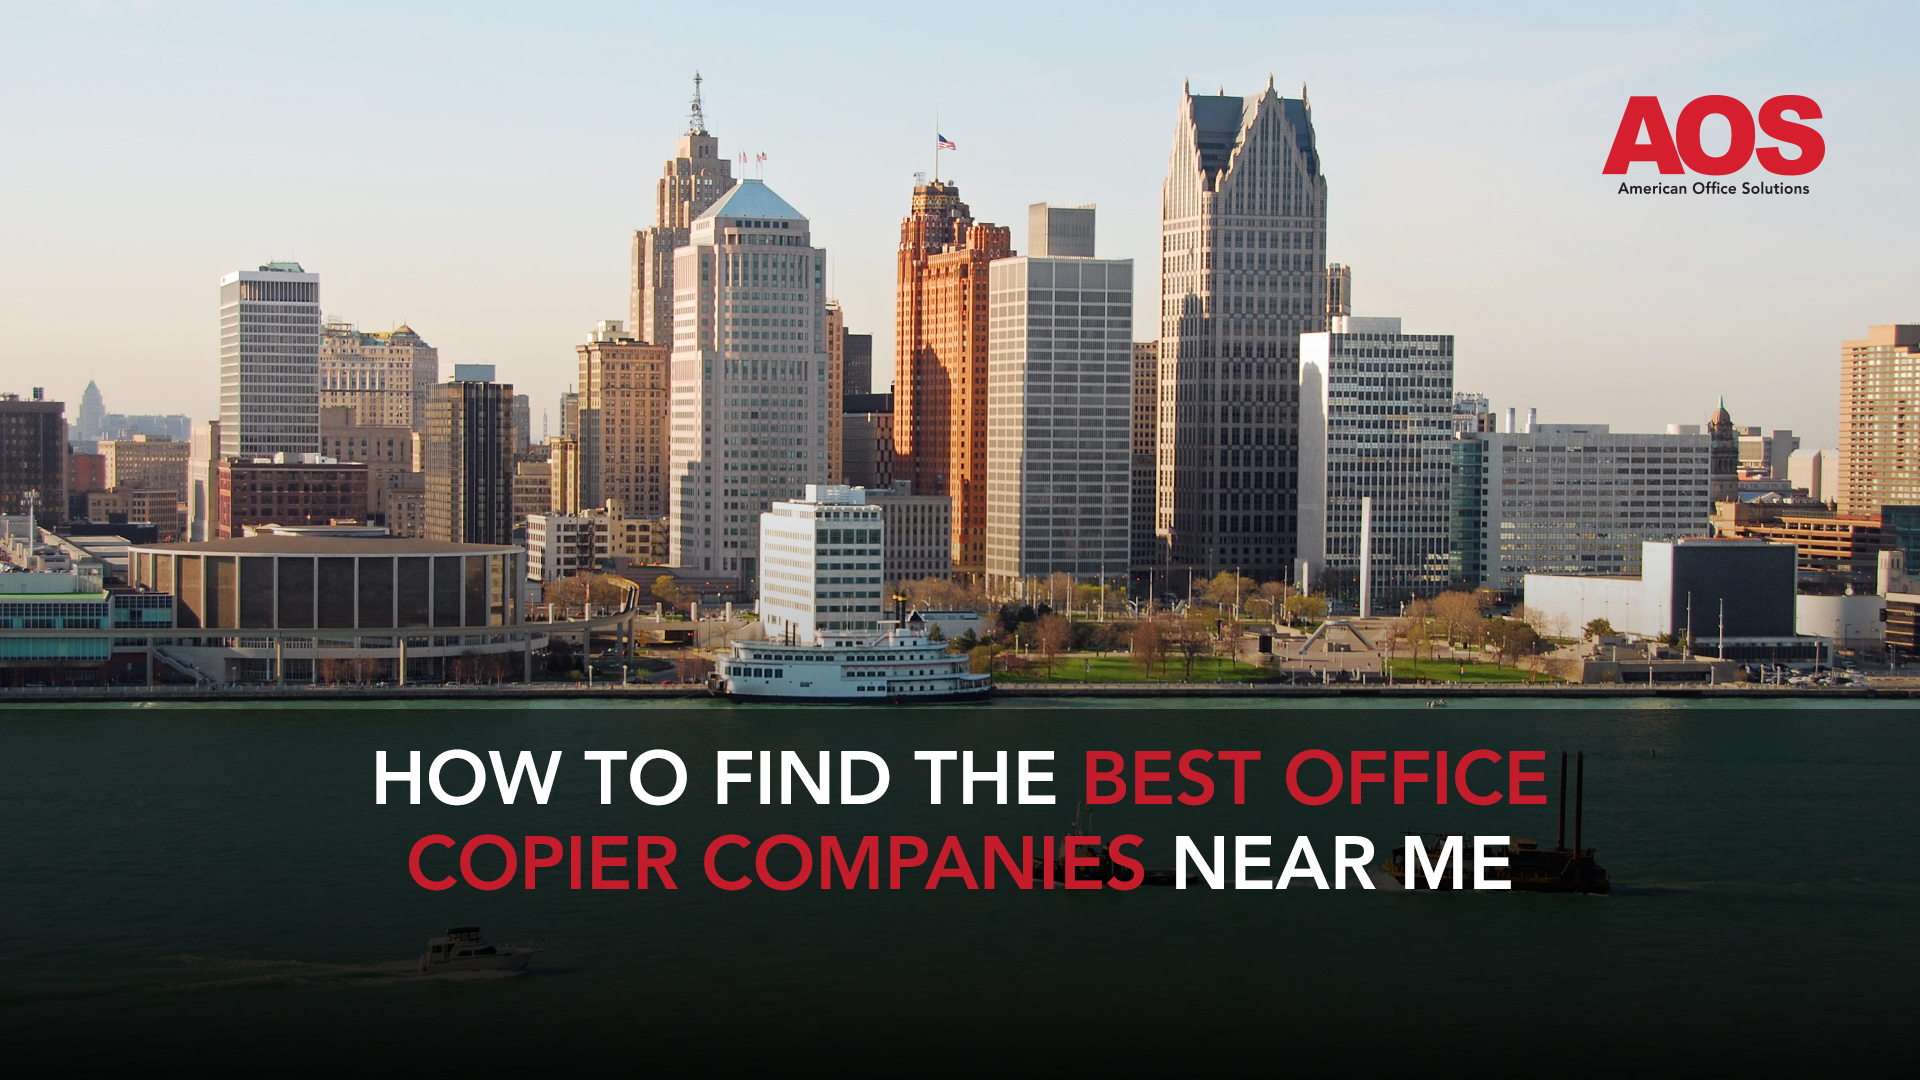 How To Find The Best Office Copier Companies Near Me